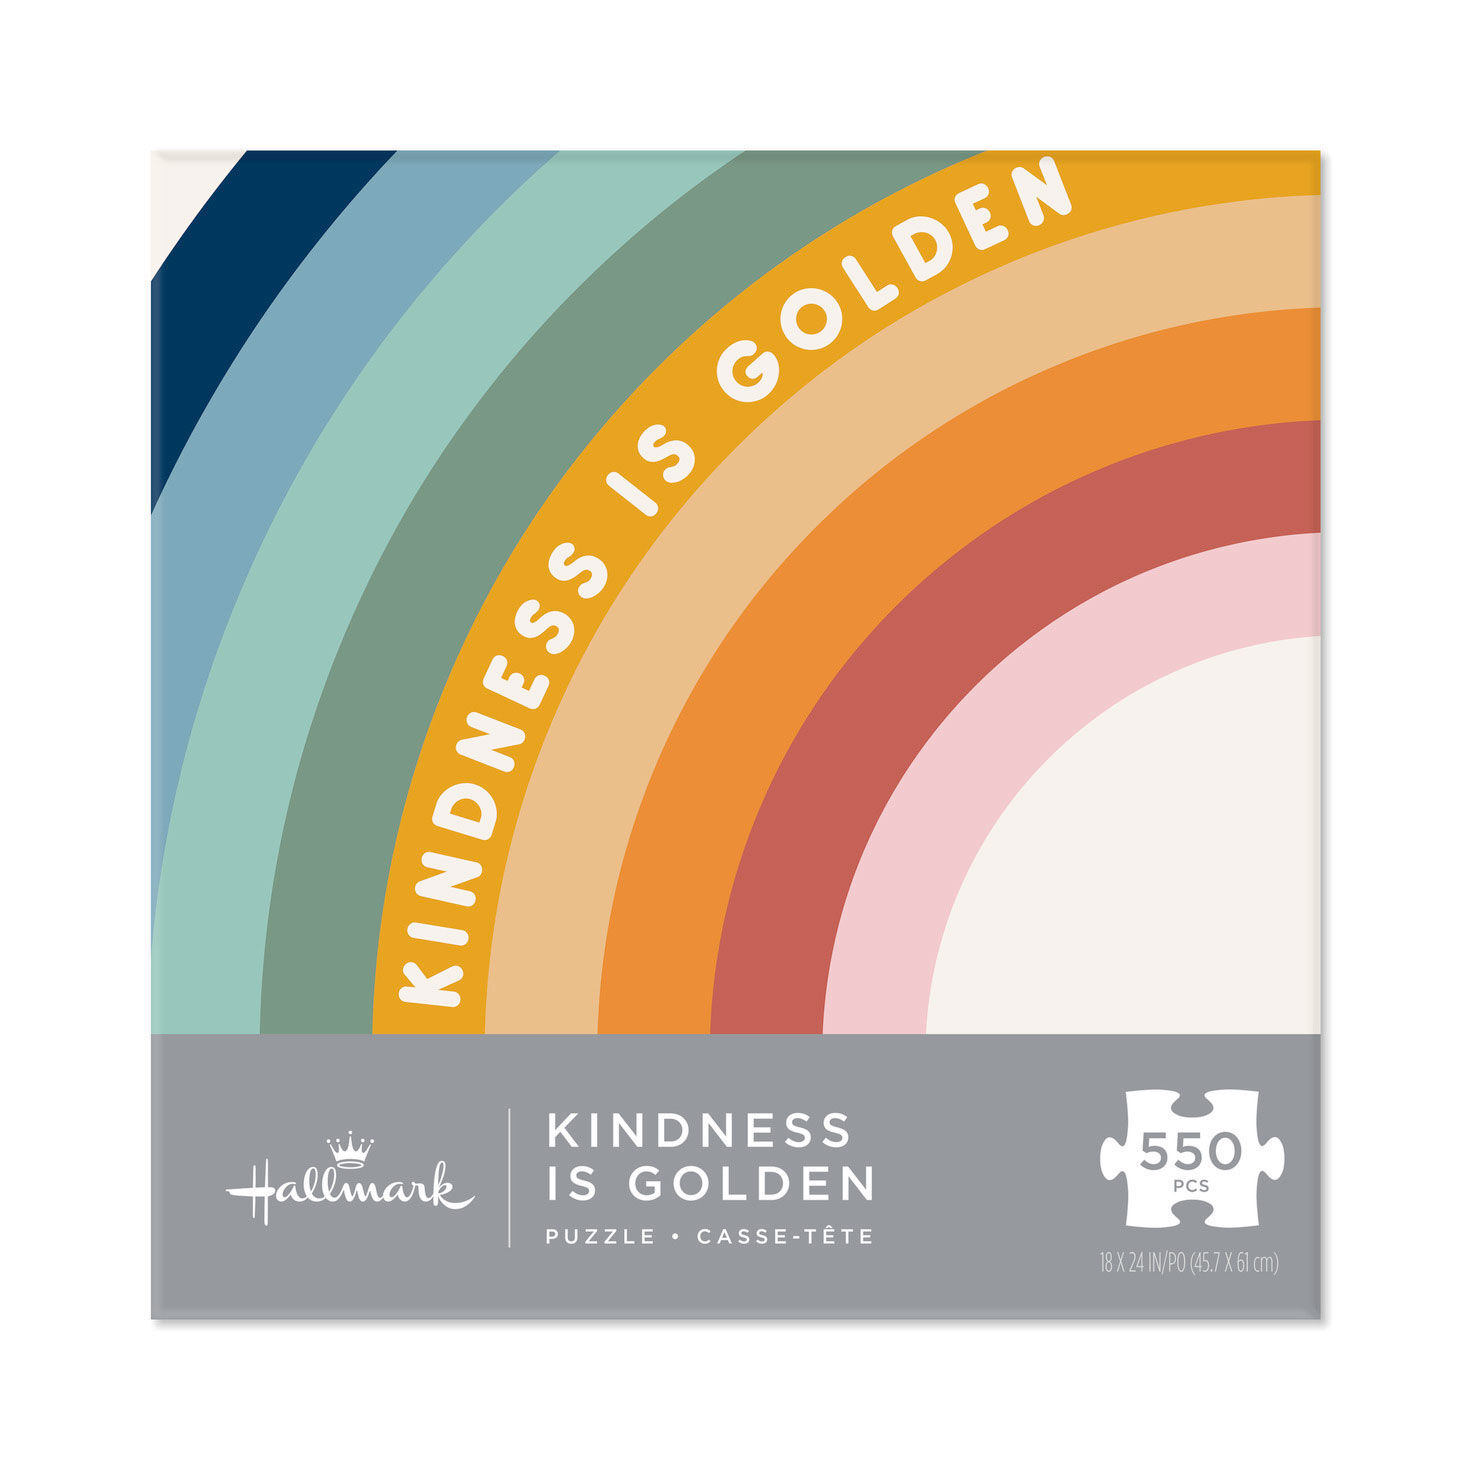 Kindness Is Golden 550-Piece Jigsaw Puzzle for only USD 14.99 | Hallmark